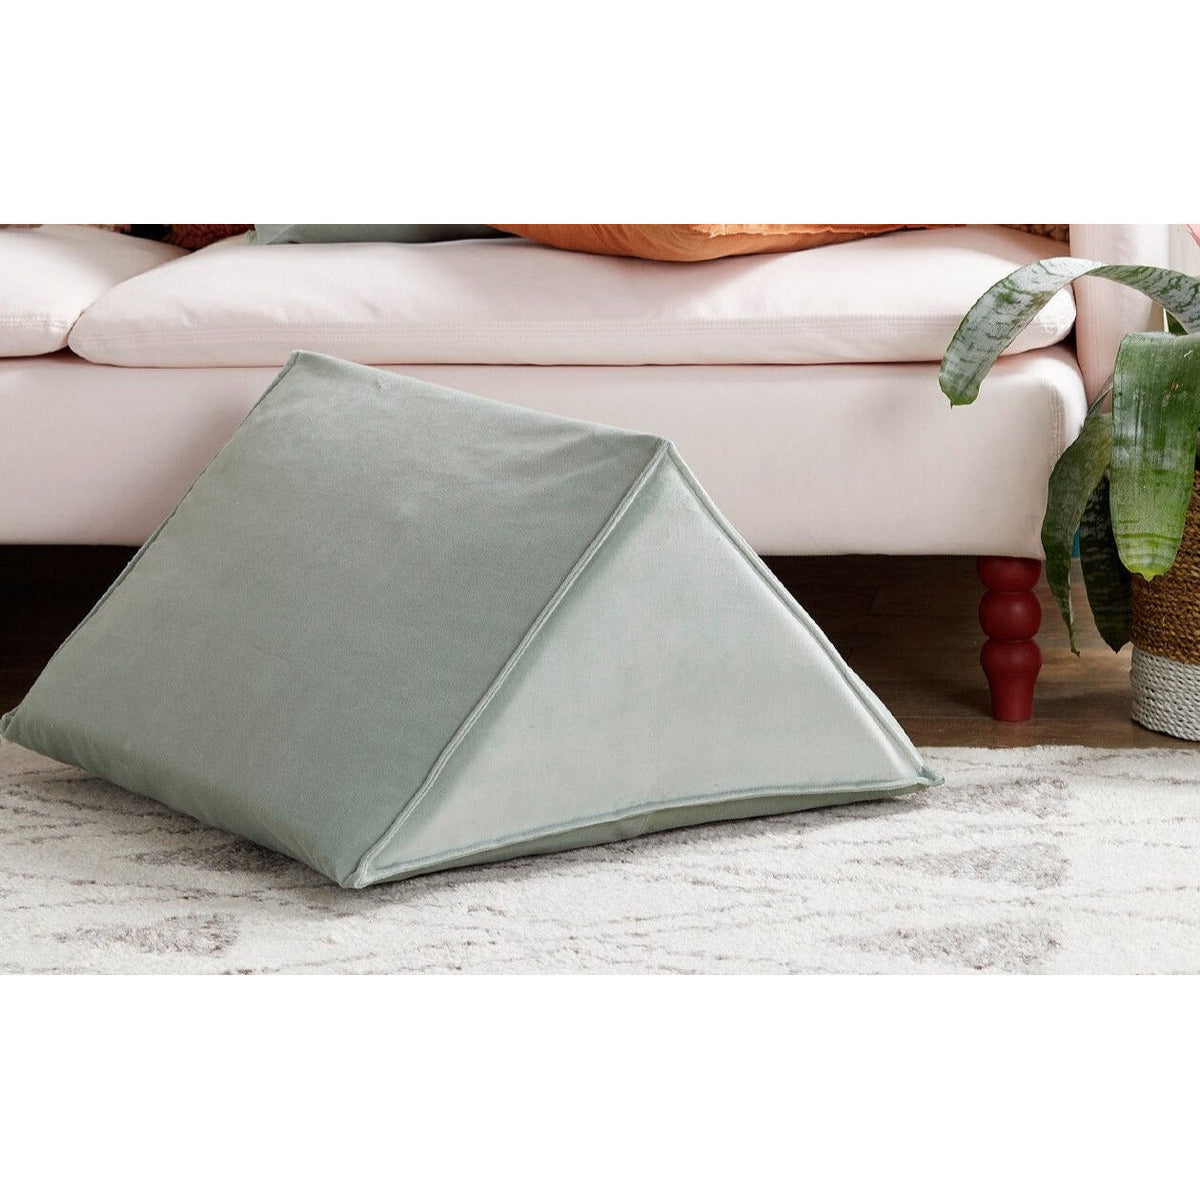 Custom Equilateral Triangle Cushions